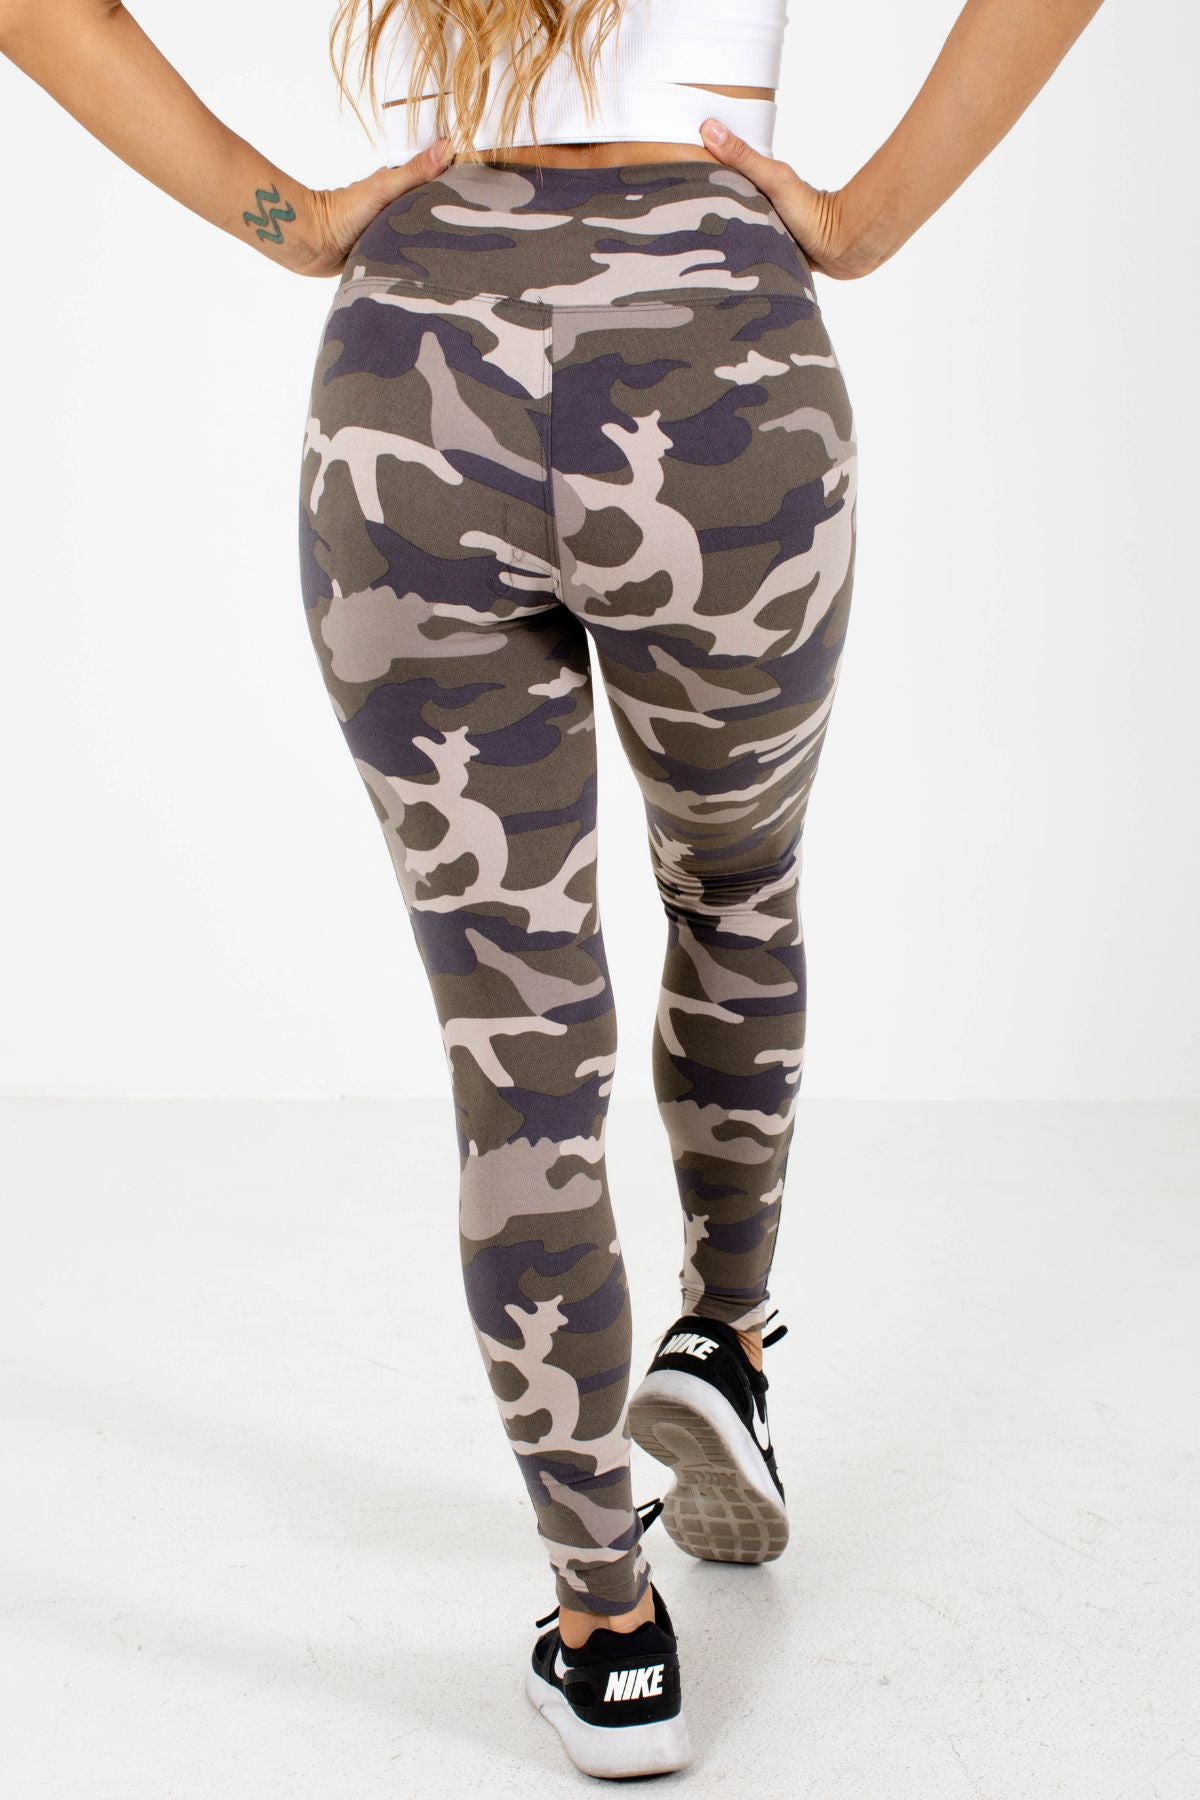 Target Camo Leggings Size XS - $9 (40% Off Retail) - From Bella